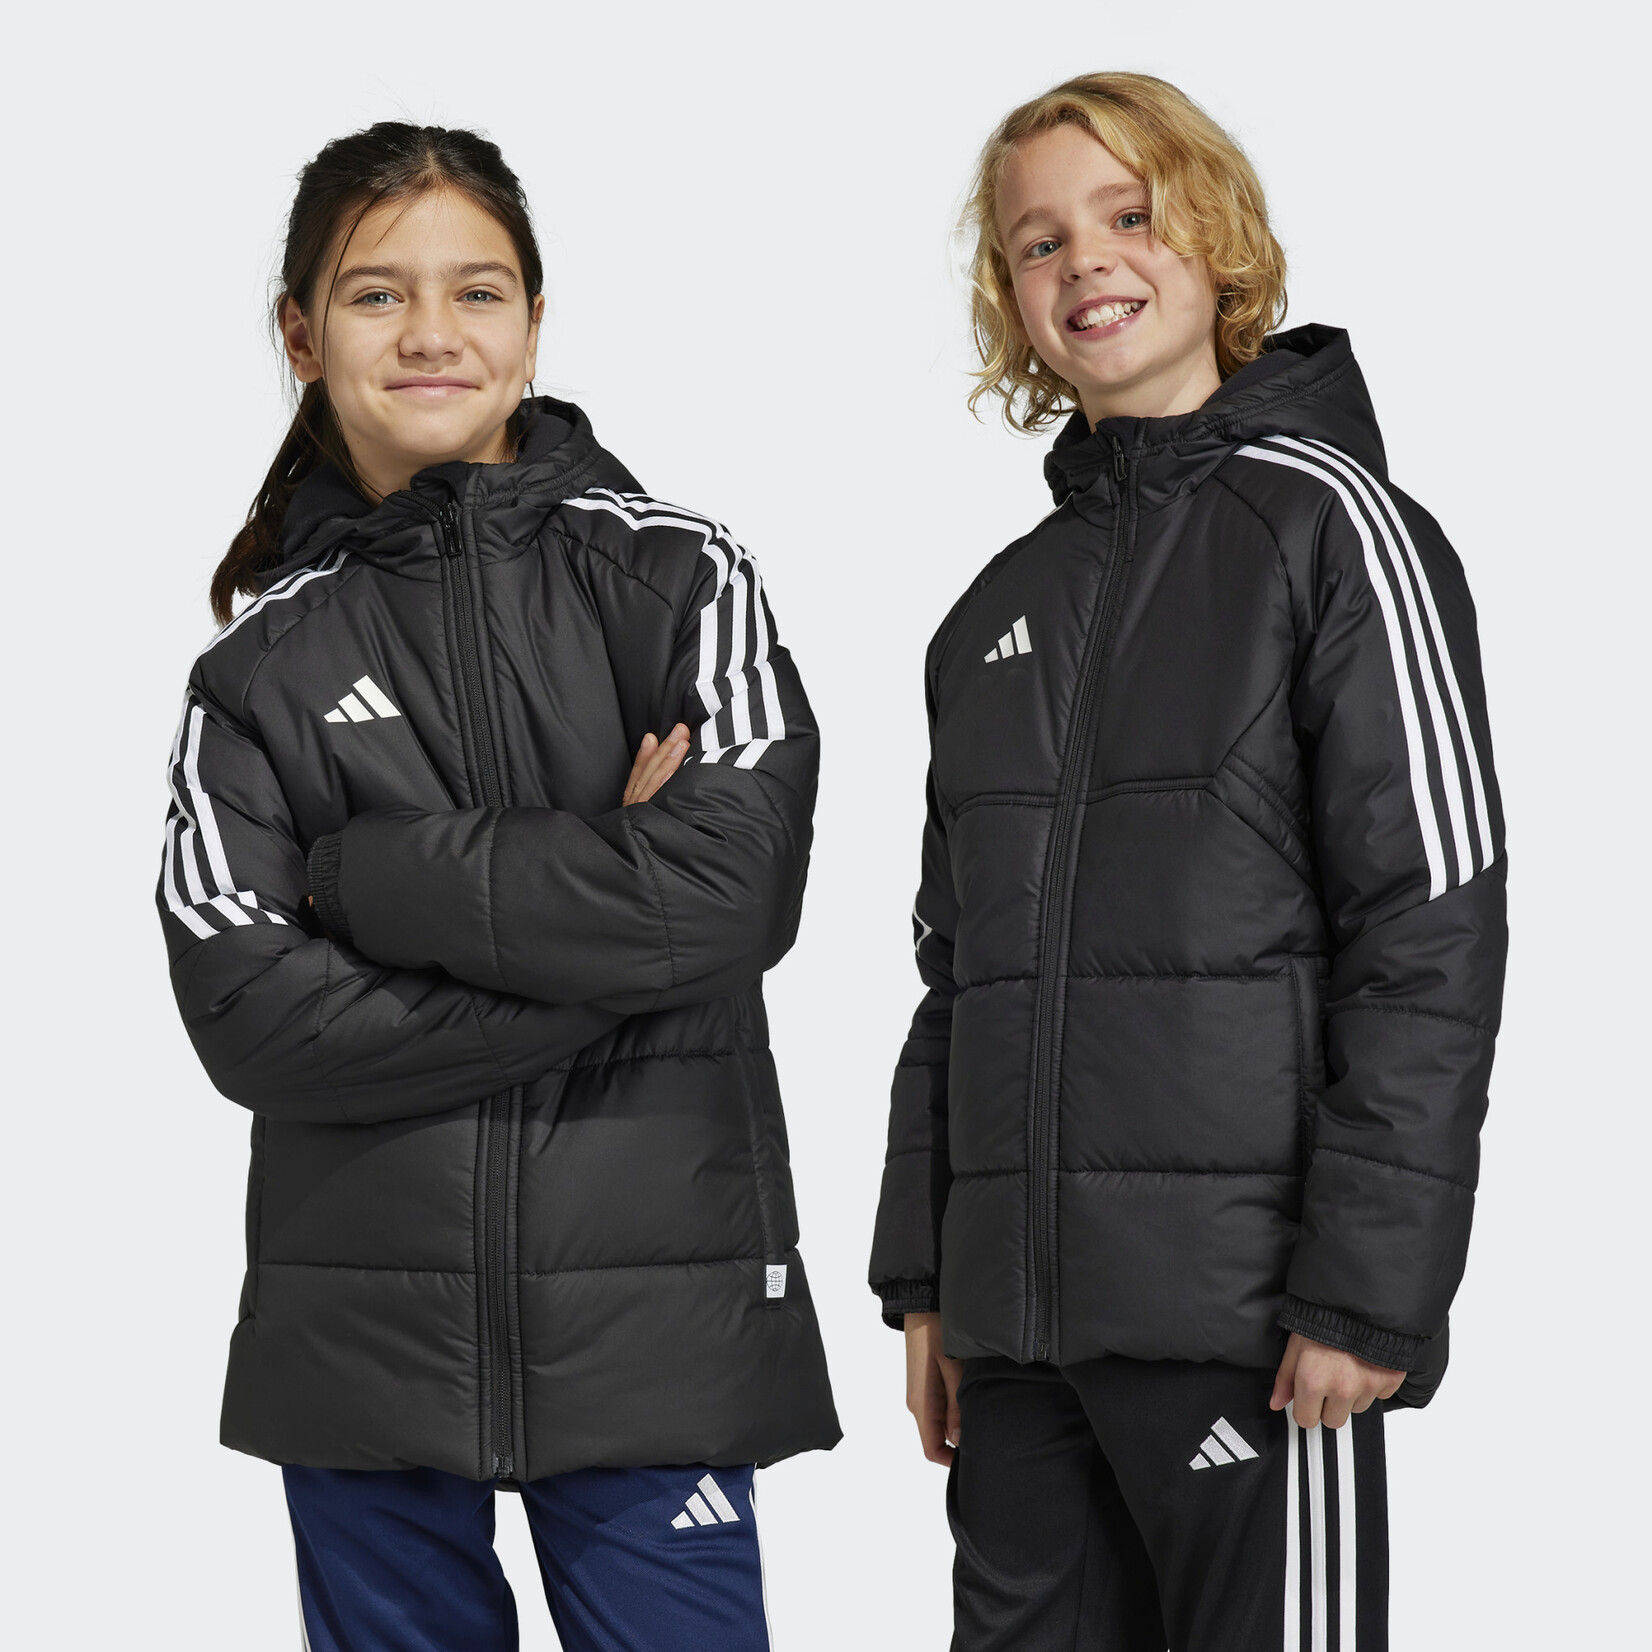 Adidas Con22 Winter Jacket (Embroidered Logo and Initials Included)